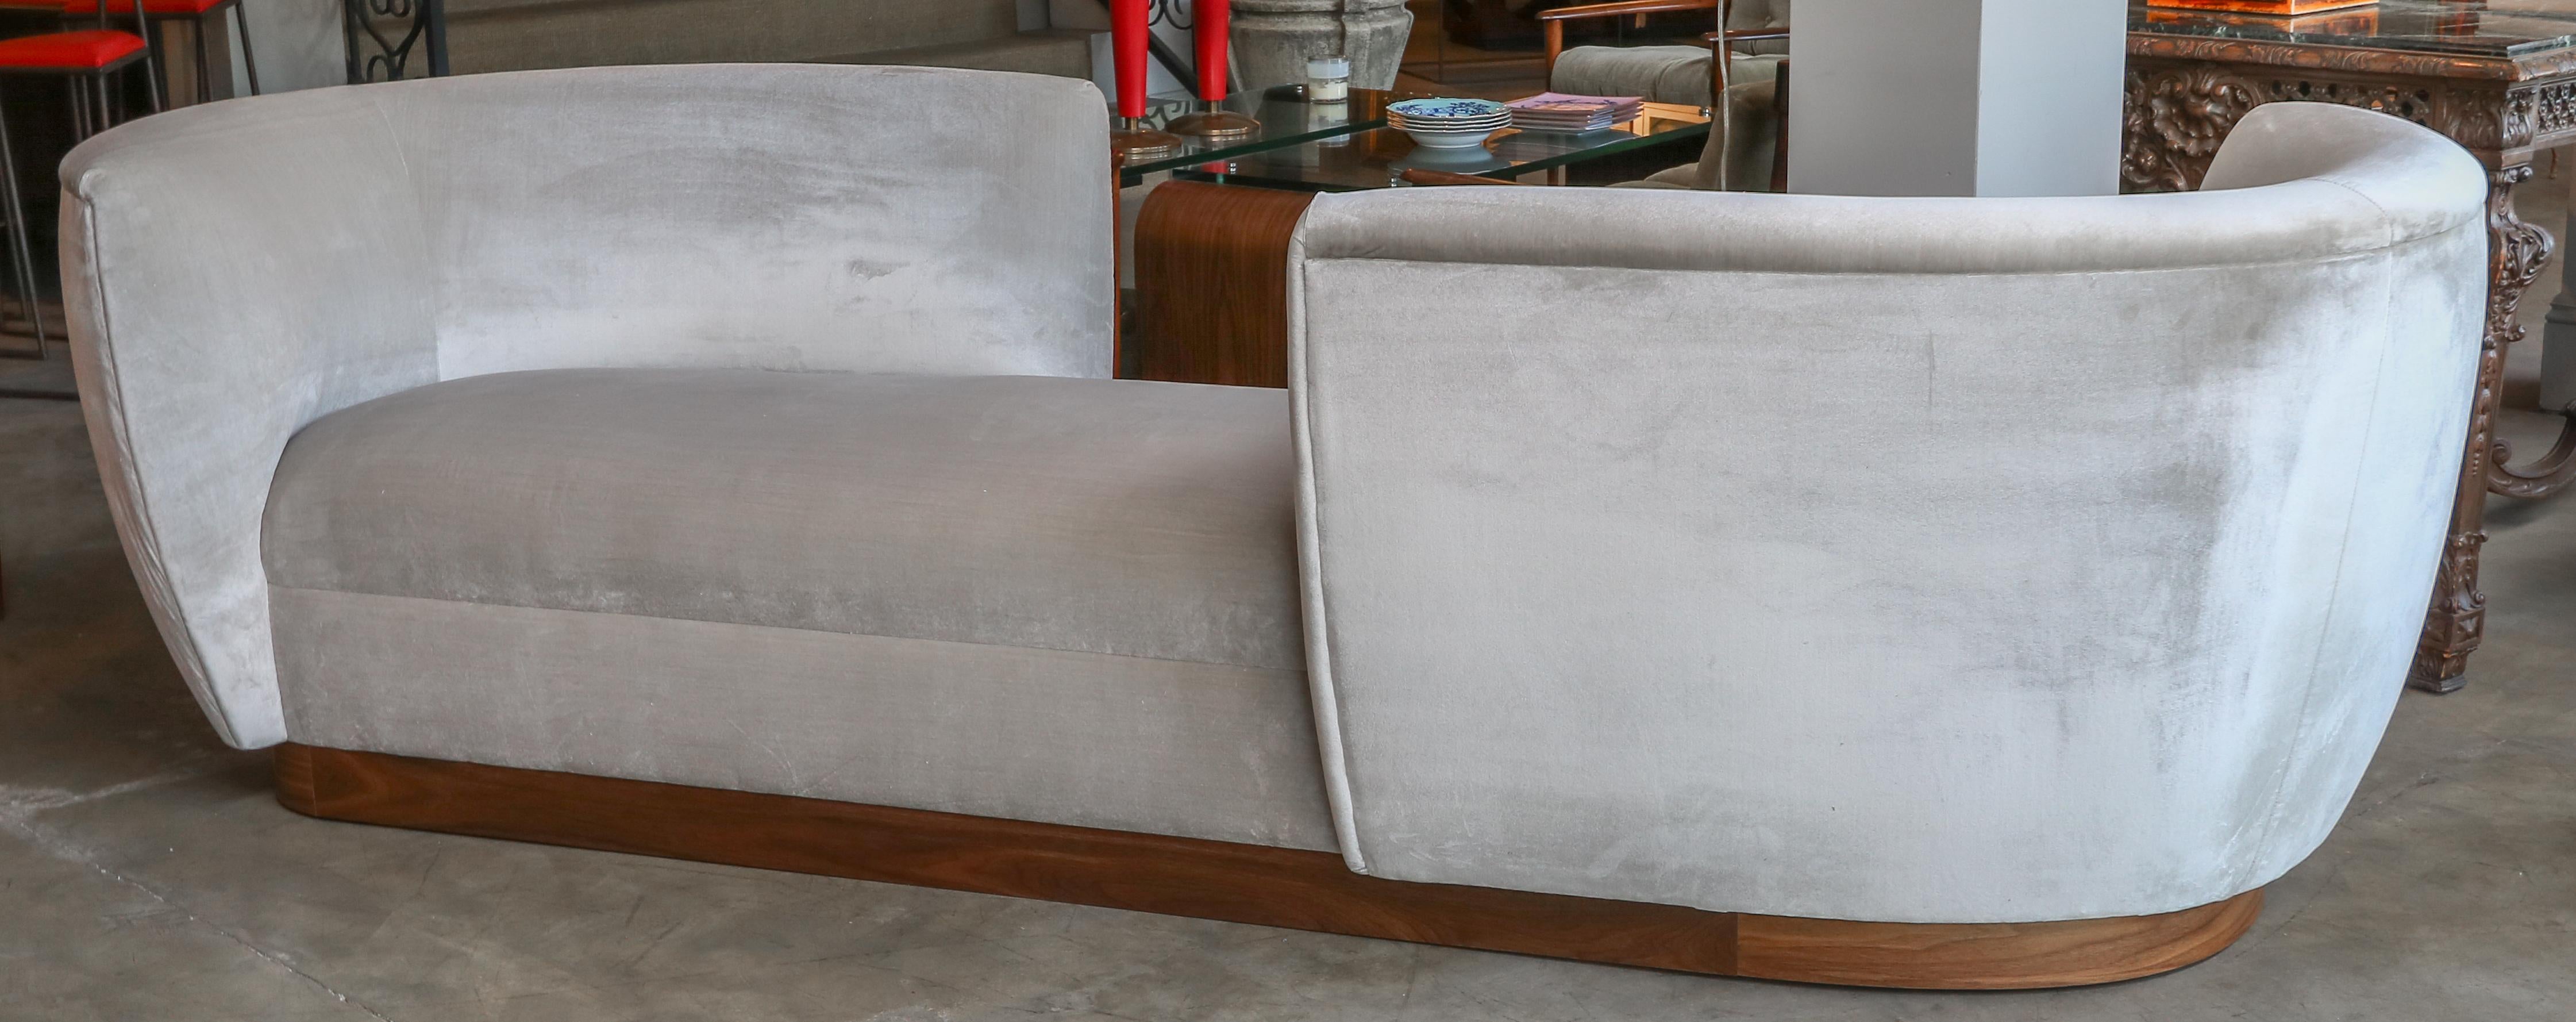 Custom Tete-a-tete Sofa Bench in Grey Velvet with Walnut Base by Adesso Imports For Sale 2